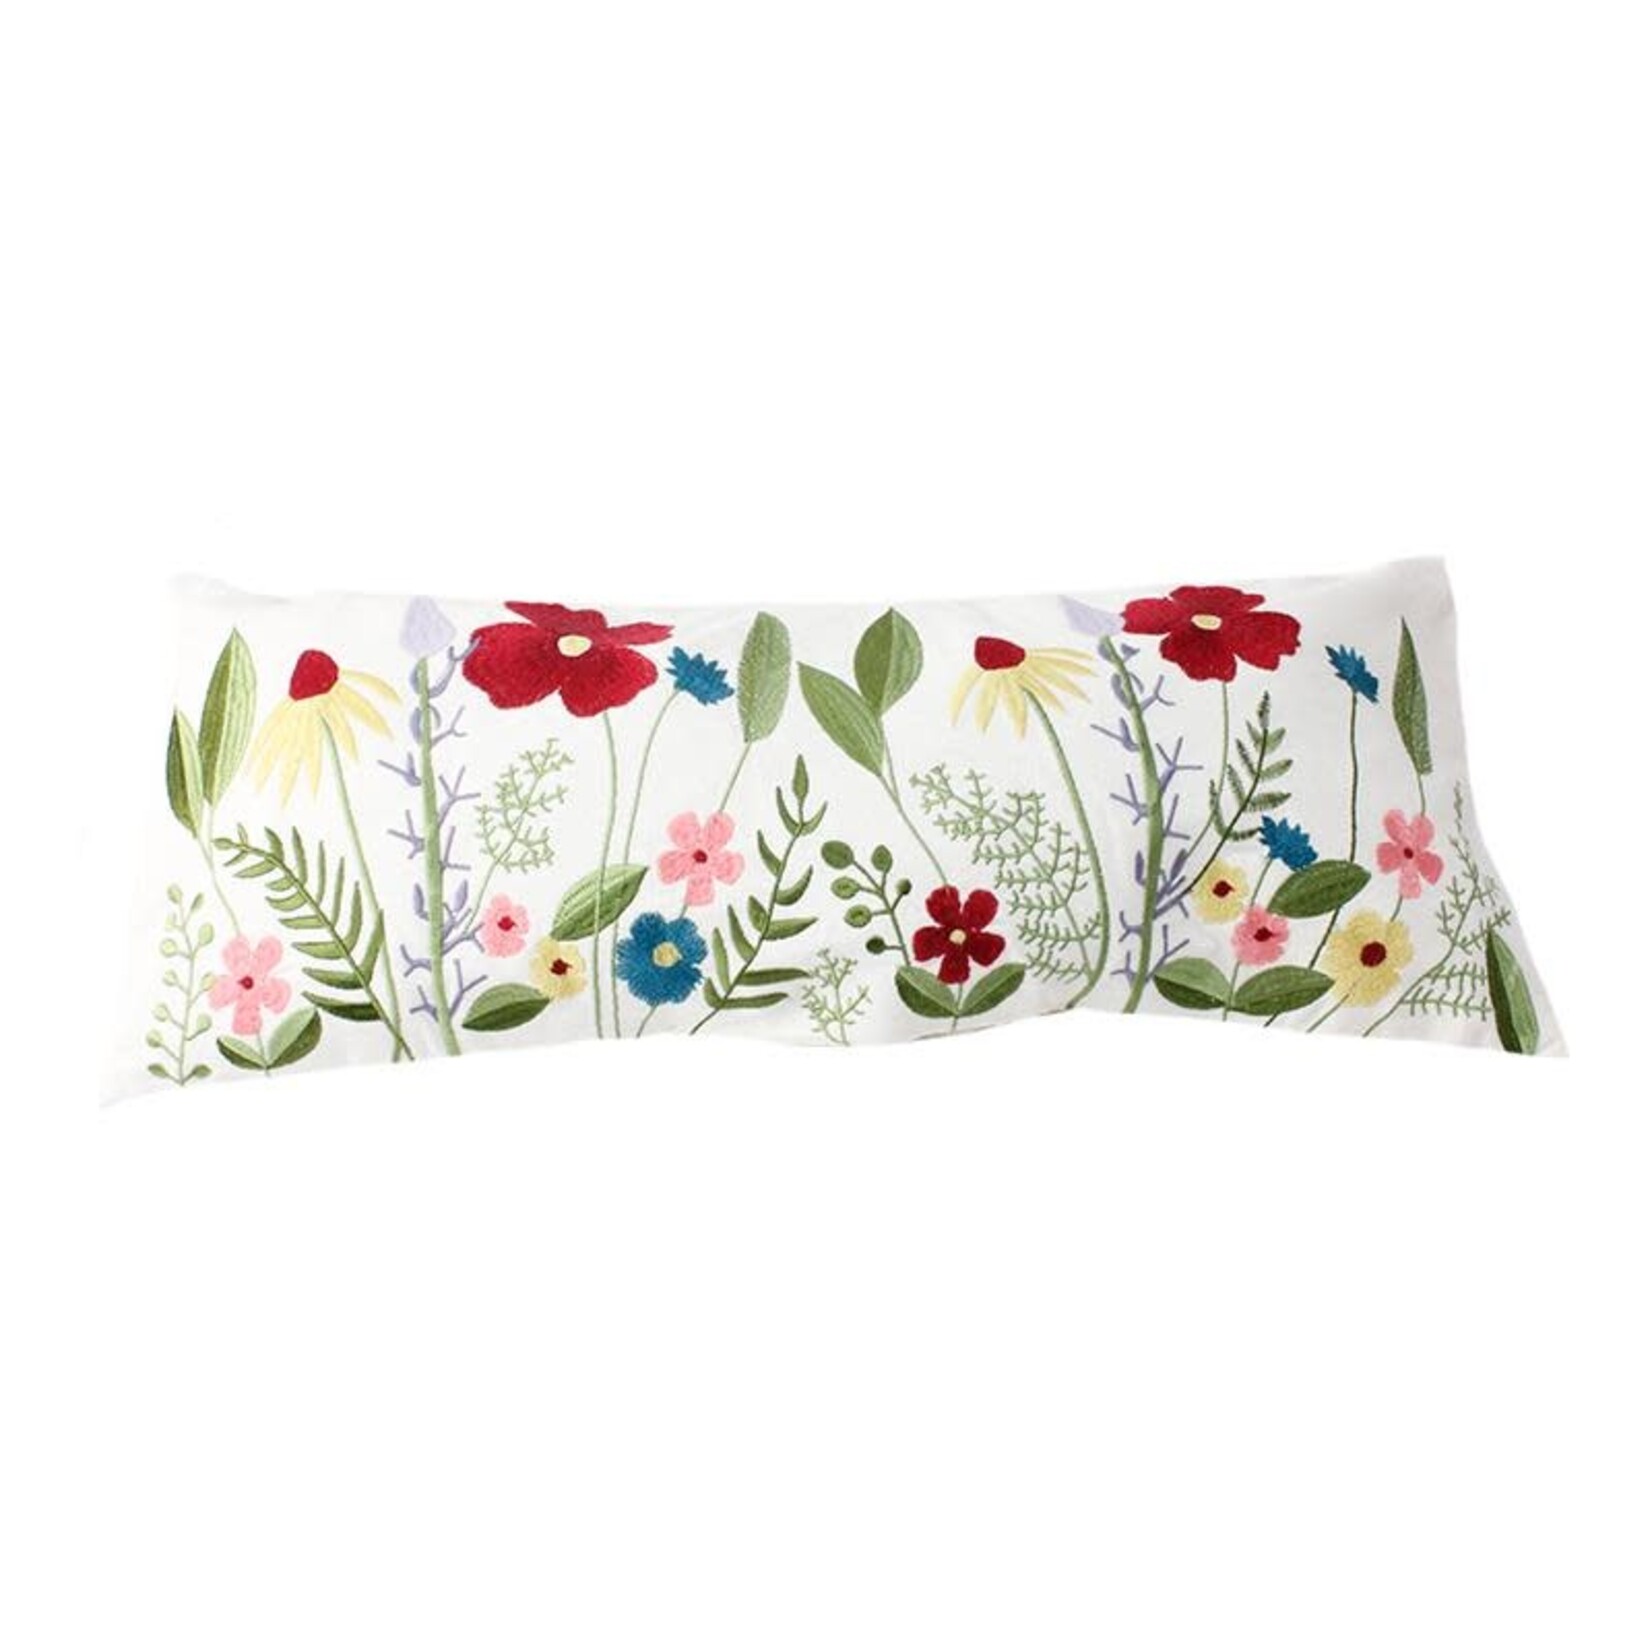 Koppers Floral Embroidered Pillow - 22"x9"